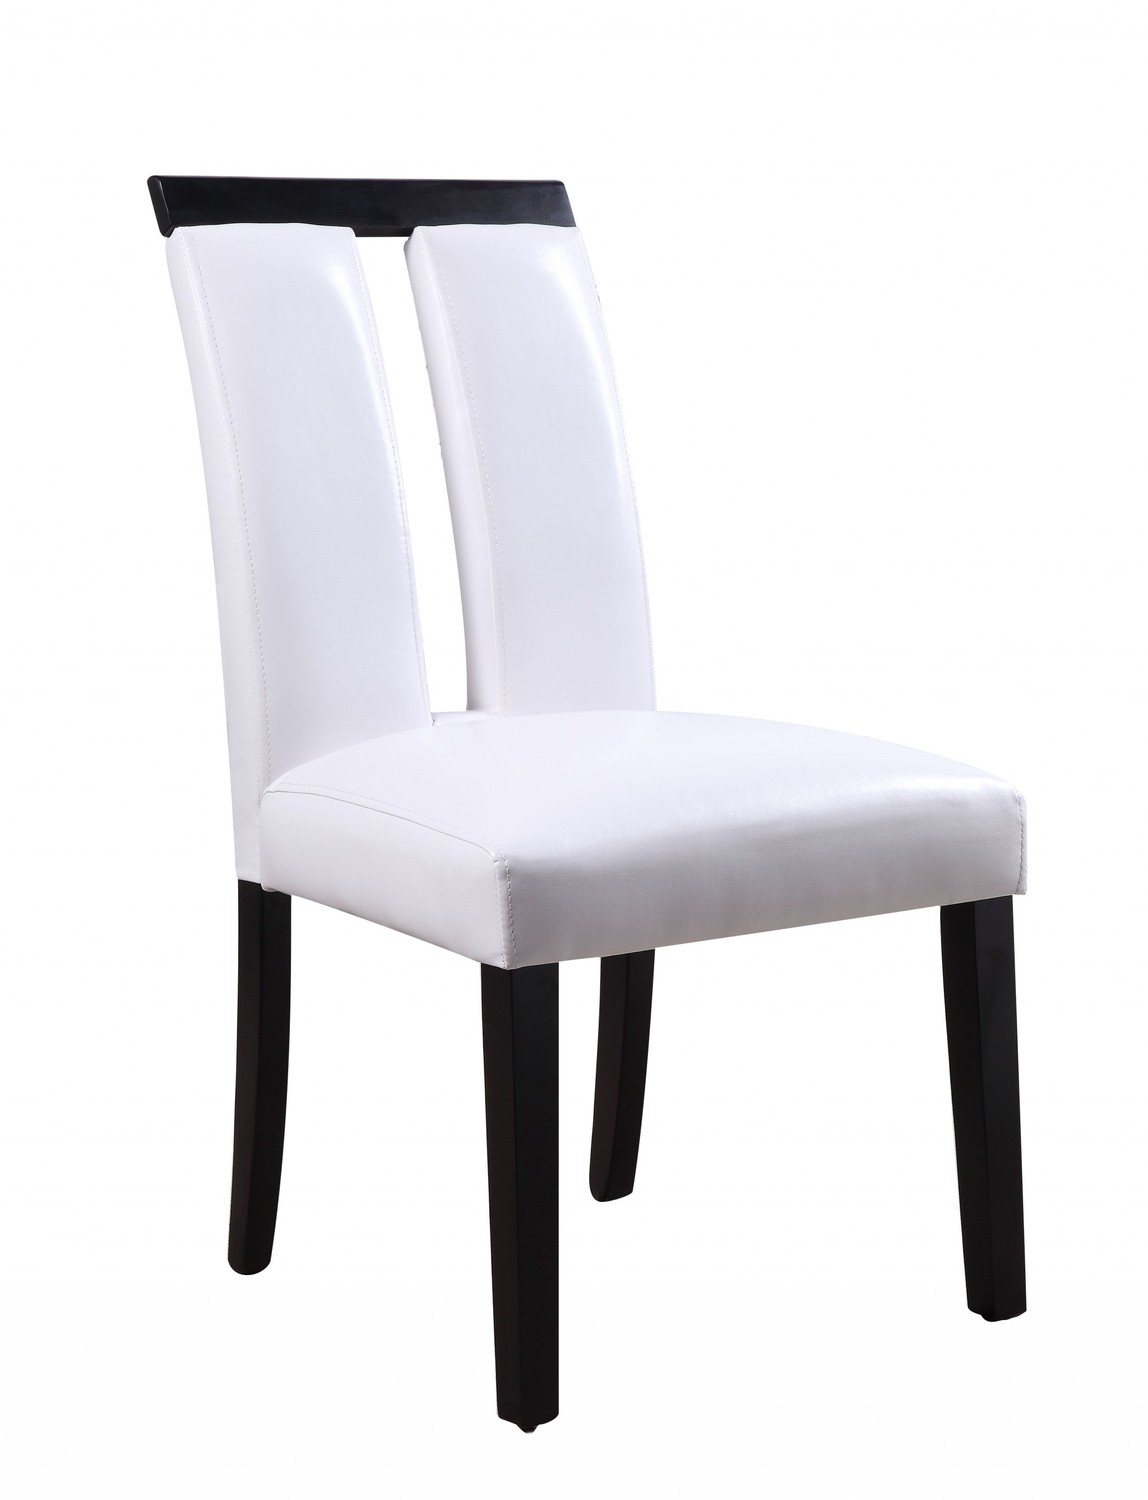 21" X 26" X 39" White Faux Leather Upholstered Seat and Black Wood Side Chair